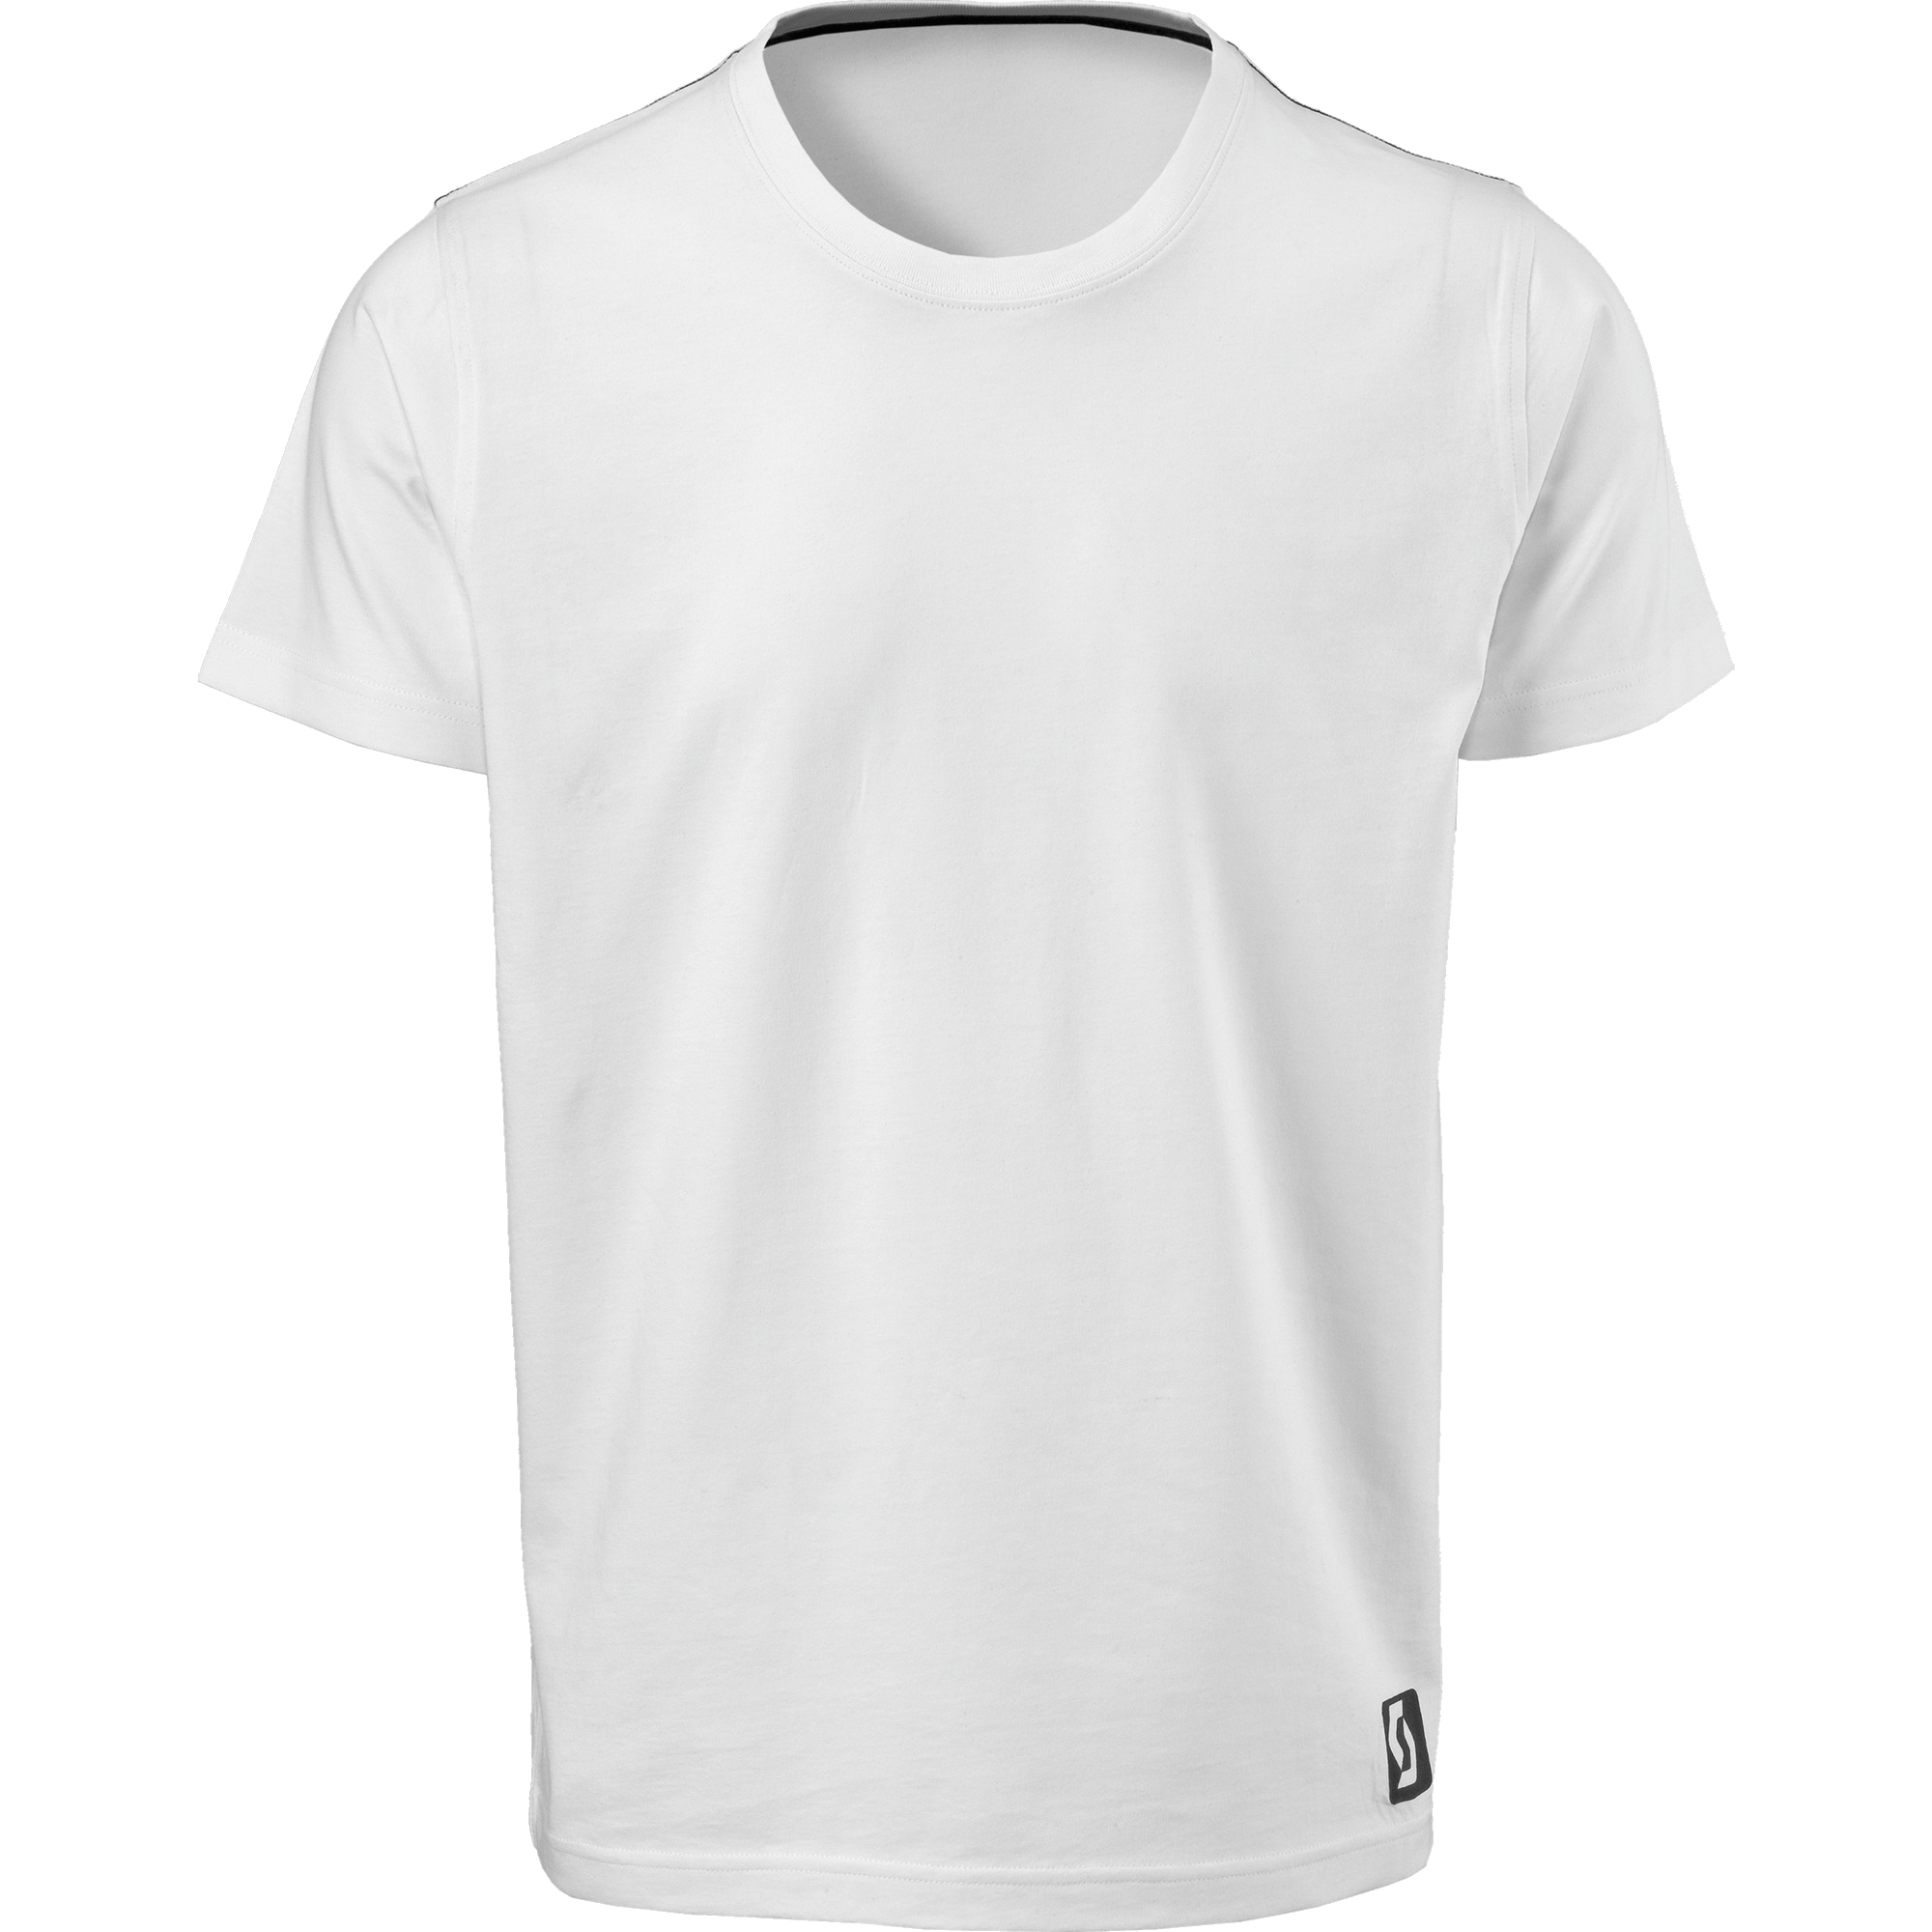 Download White T Shirt Png Image Hq Png Image Freepngimg | Free Nude ...